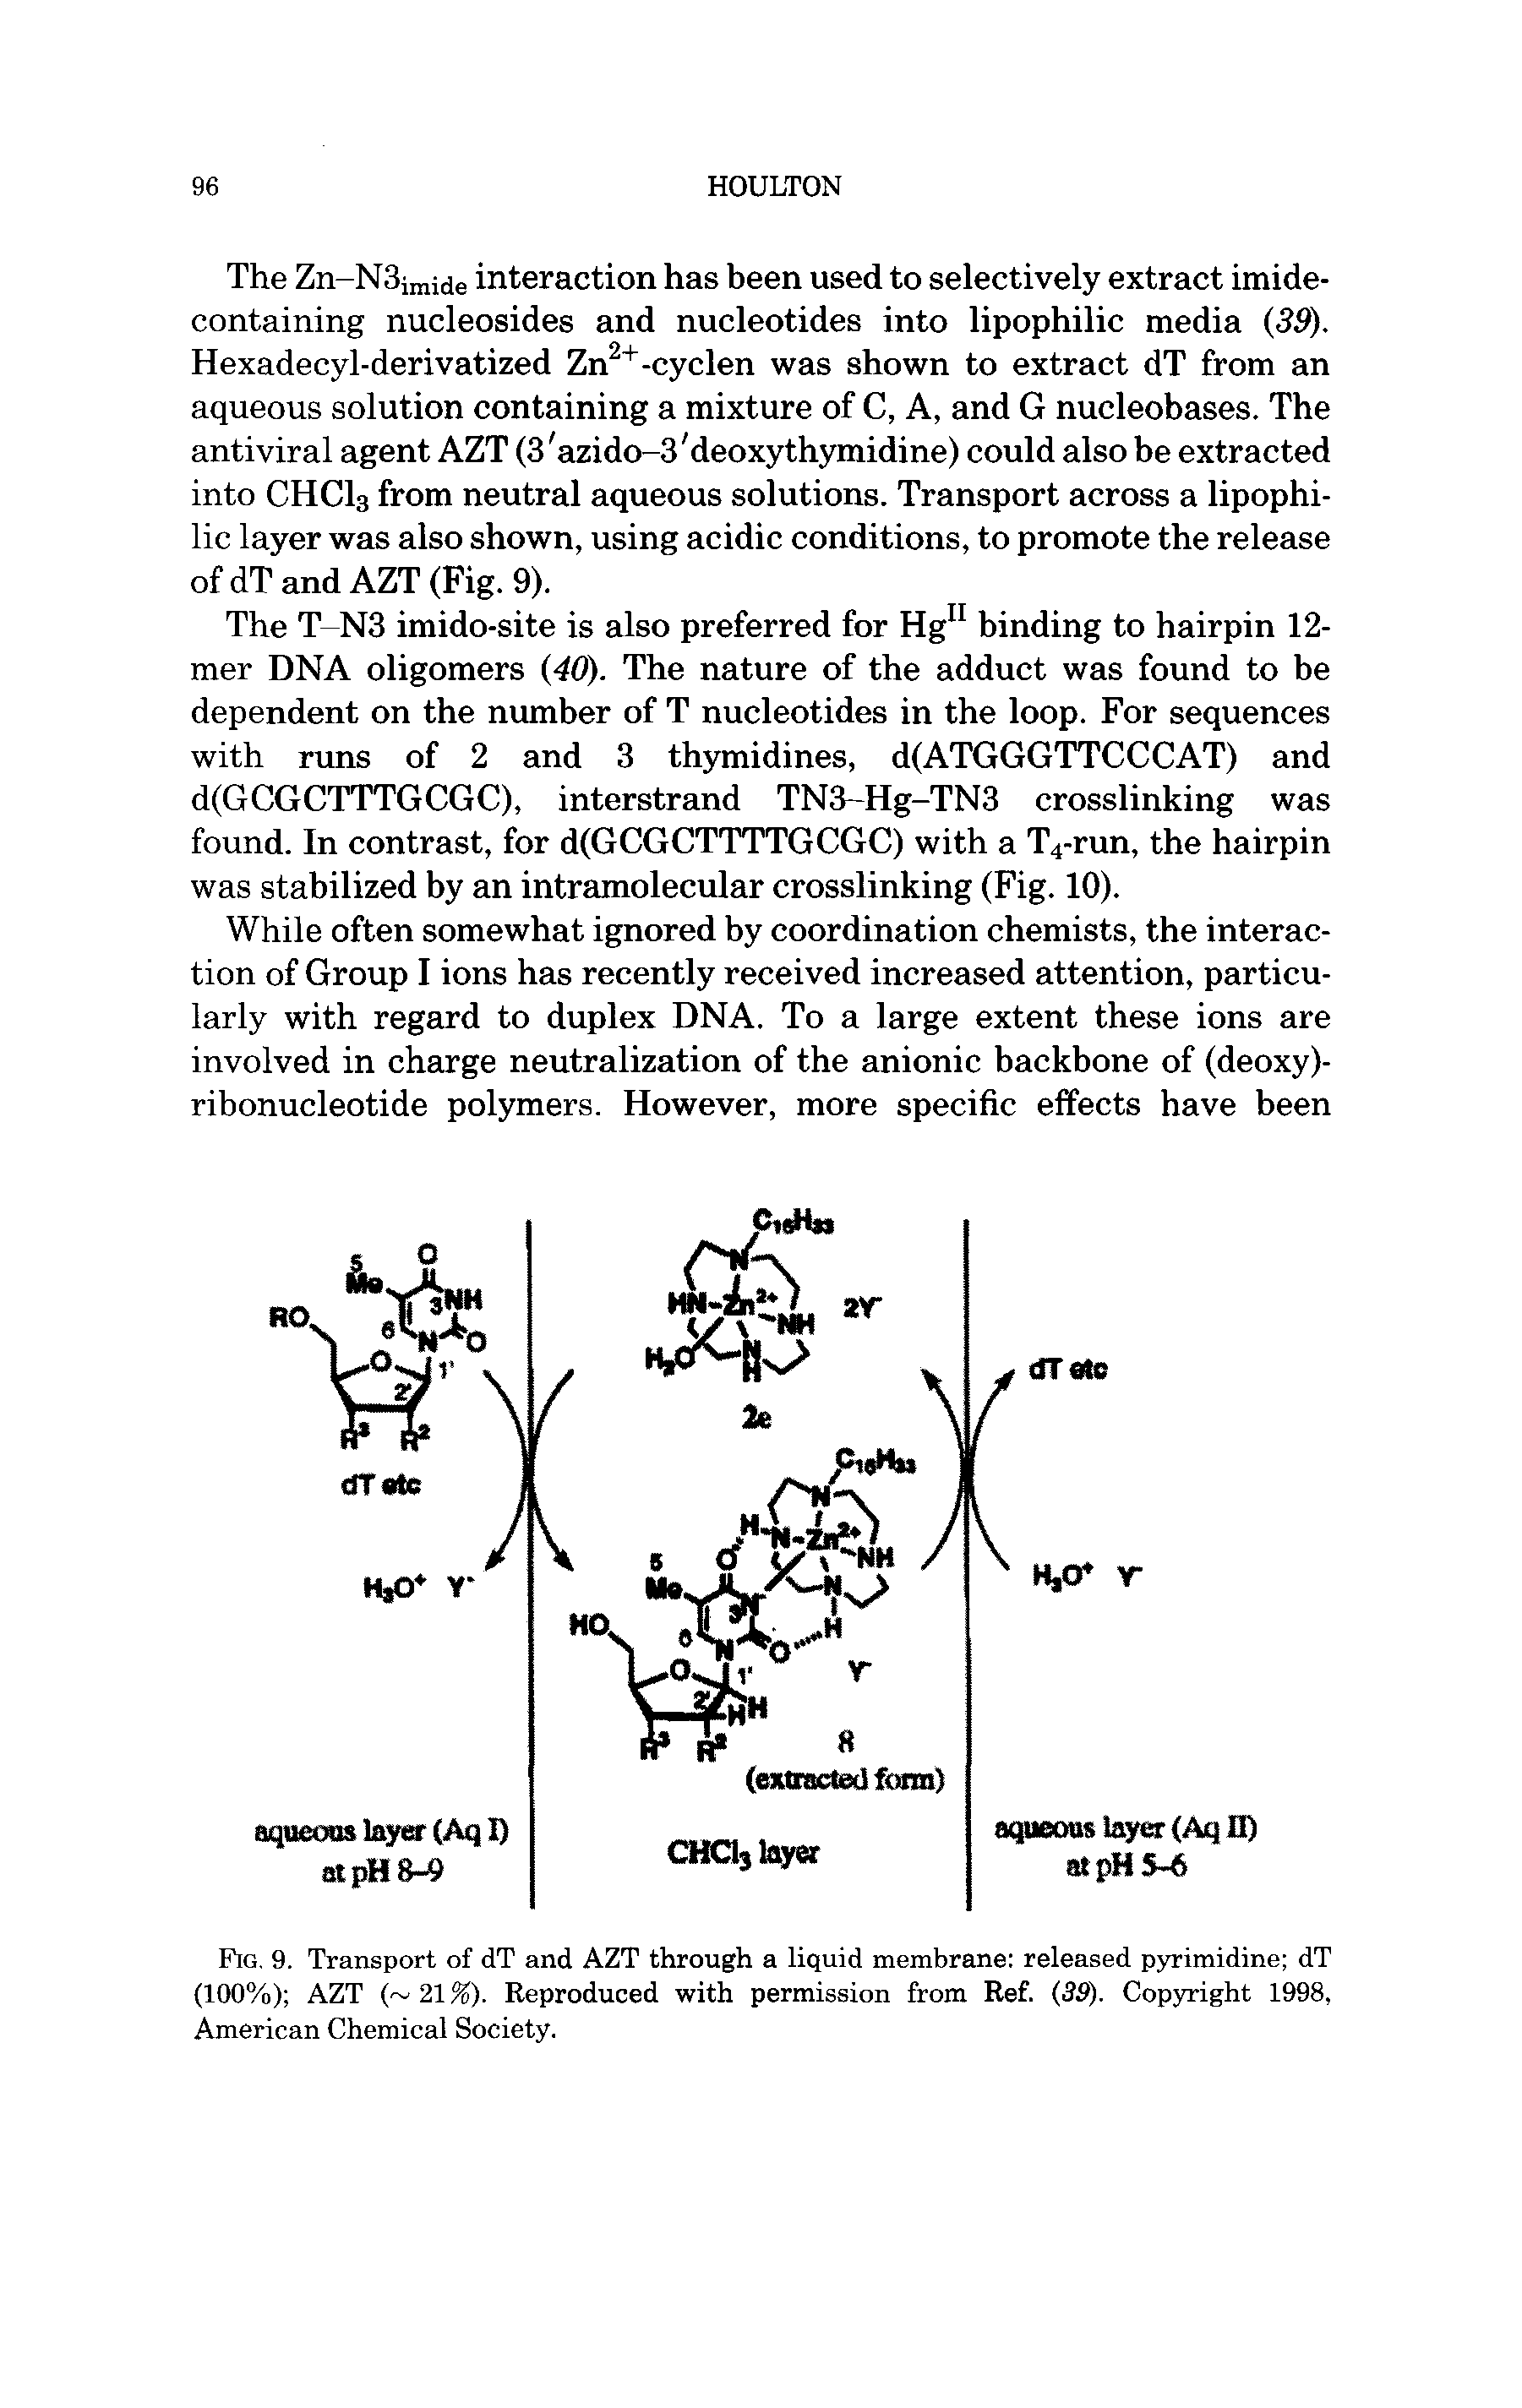 Fig. 9. Transport of dT and AZT through a liquid membrane released pyrimidine dT (100%) AZT ( 21 %). Reproduced with permission from Ref. (39). Copyright 1998, American Chemical Society.